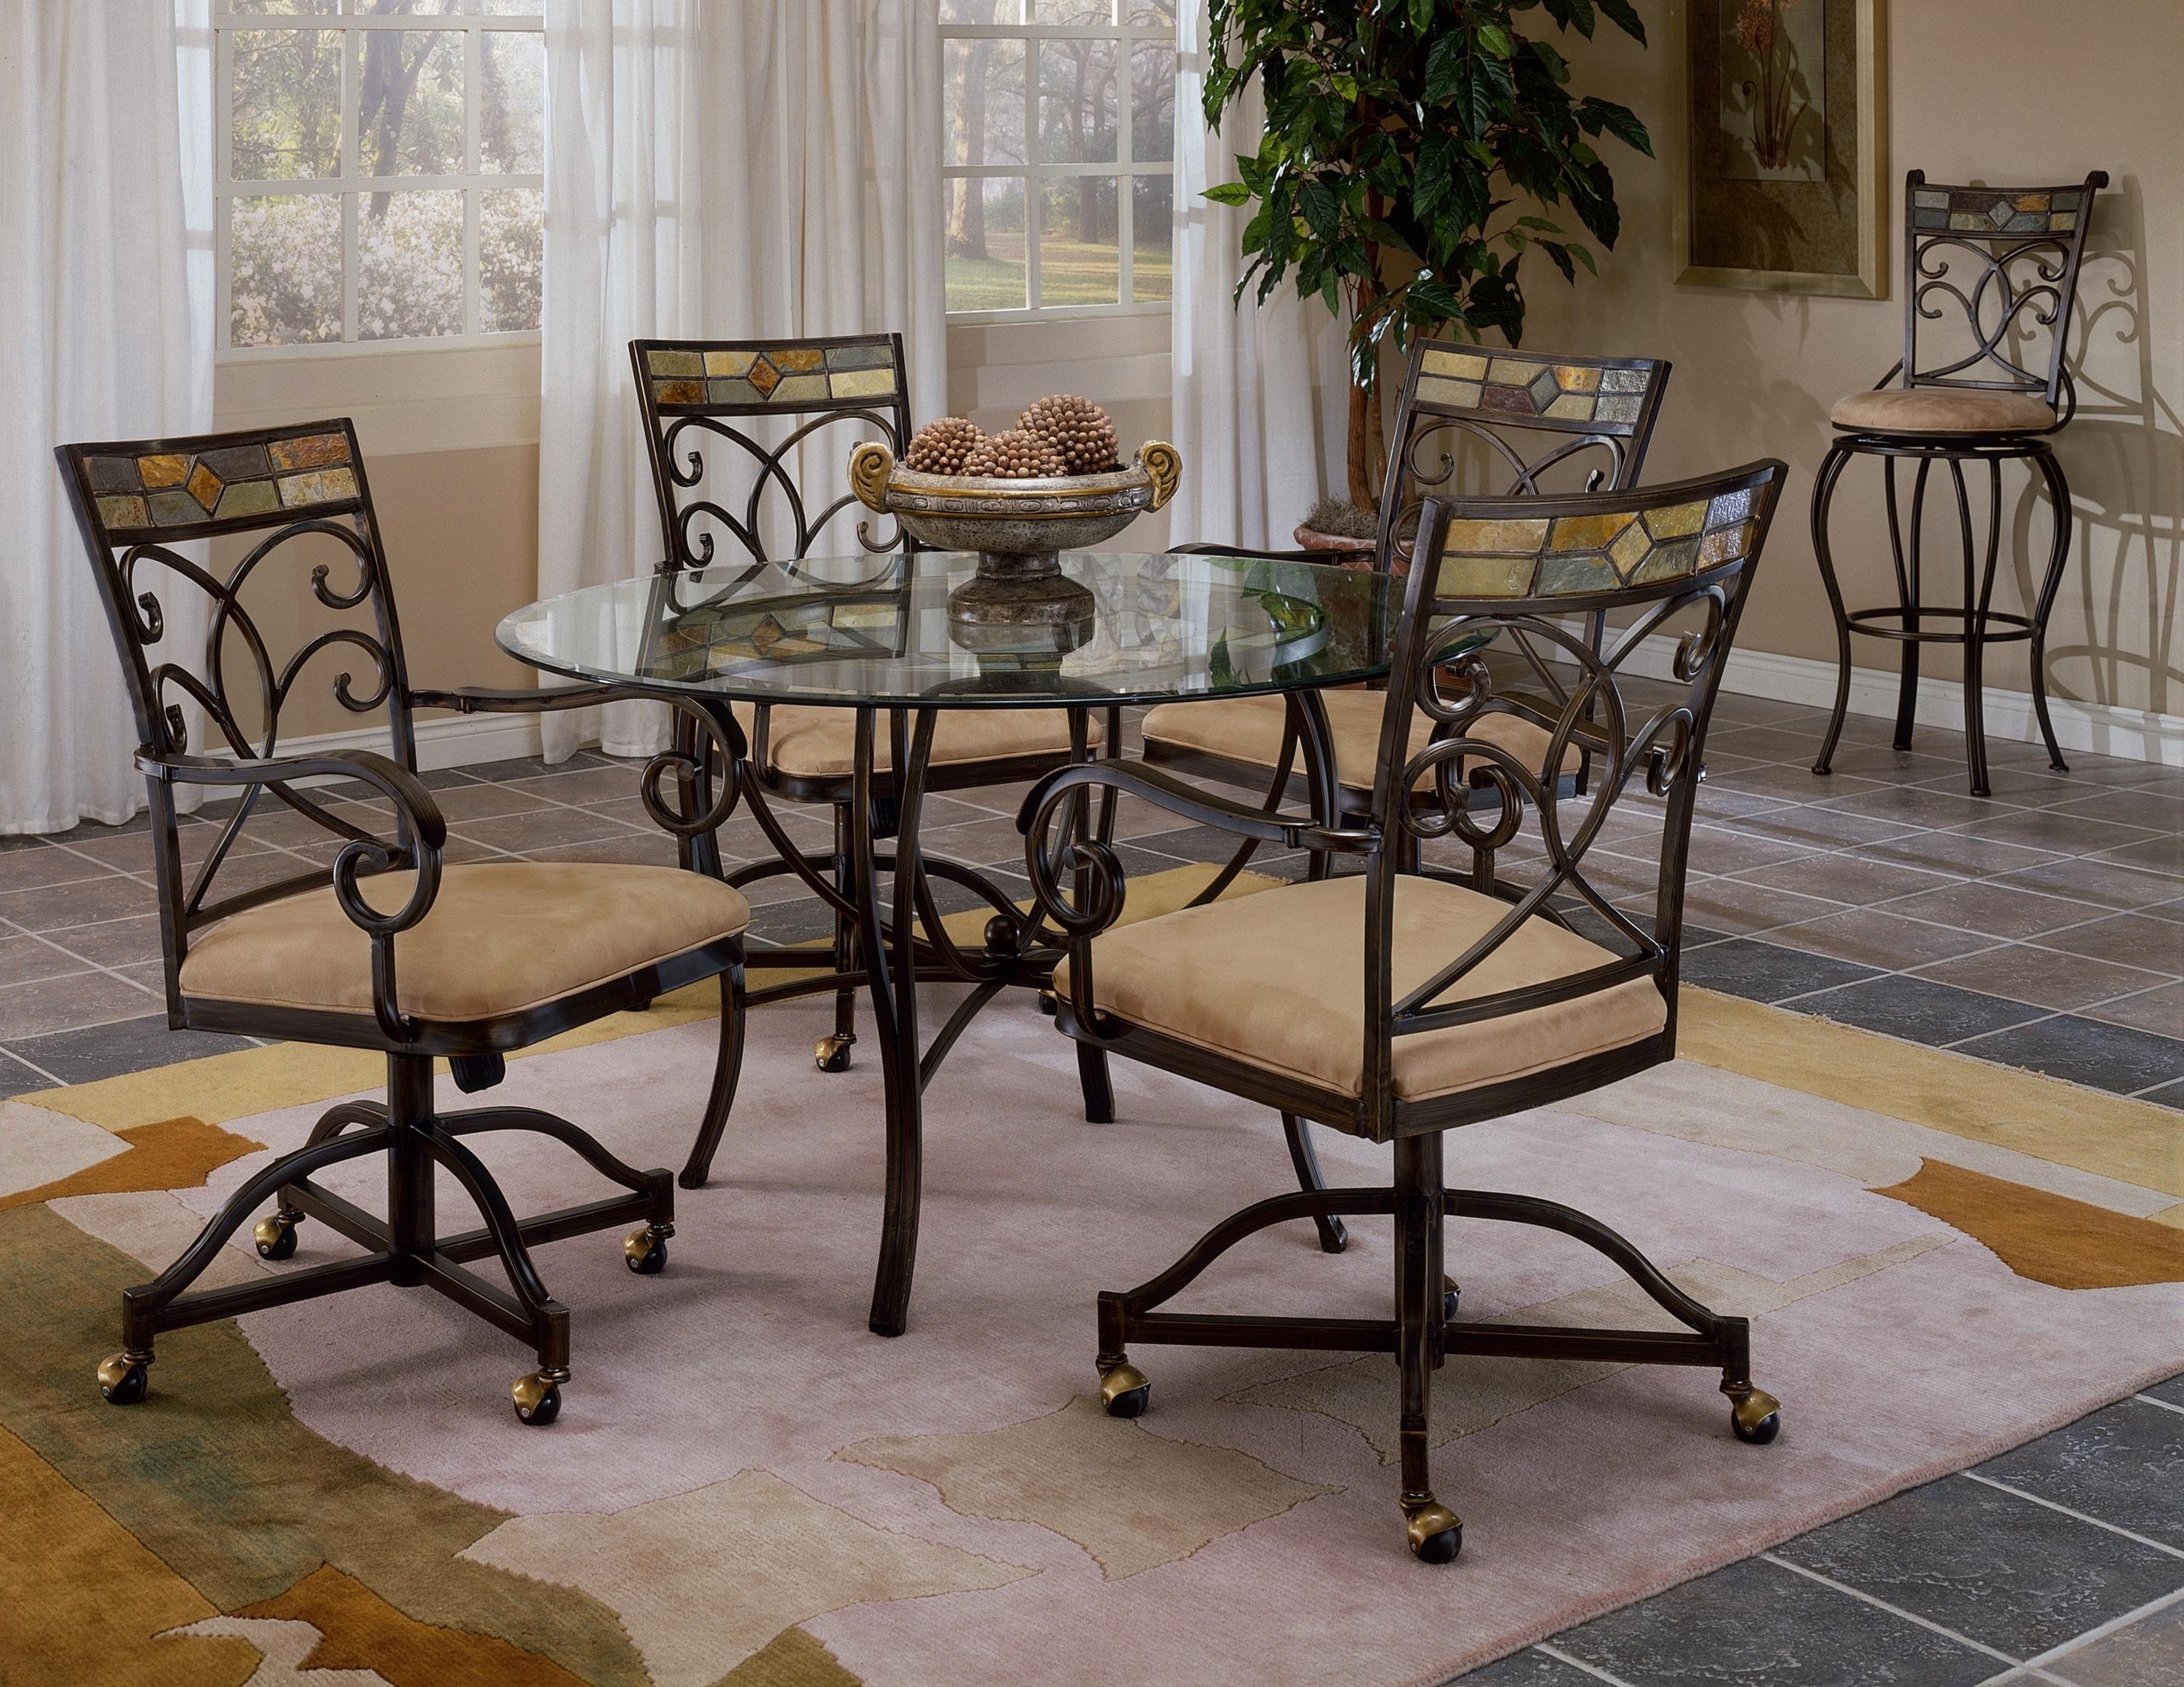 Dining Room Table And Chairs With Casters